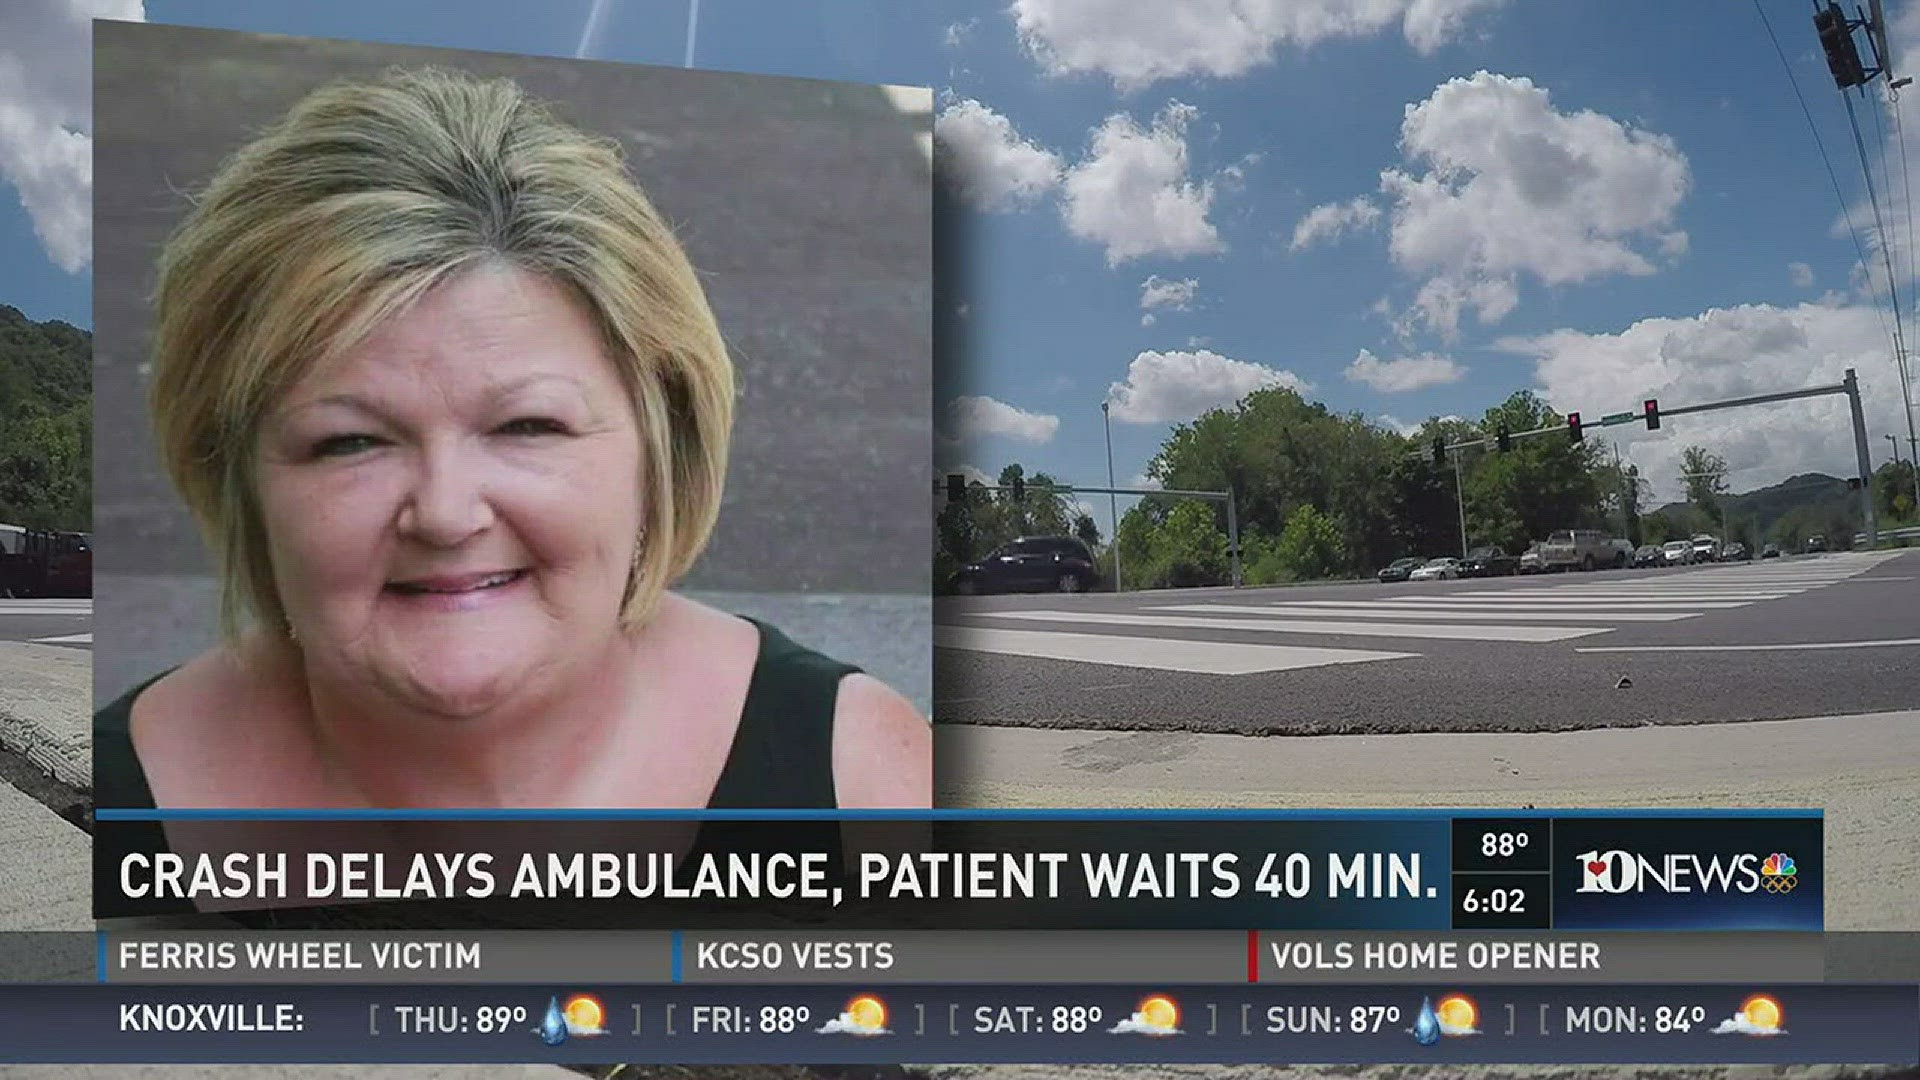 When a van crashed into an ambulance on Oak Ridge Highway, the woman who the ambulance was called for was forced to wait 40 minutes for treatment.